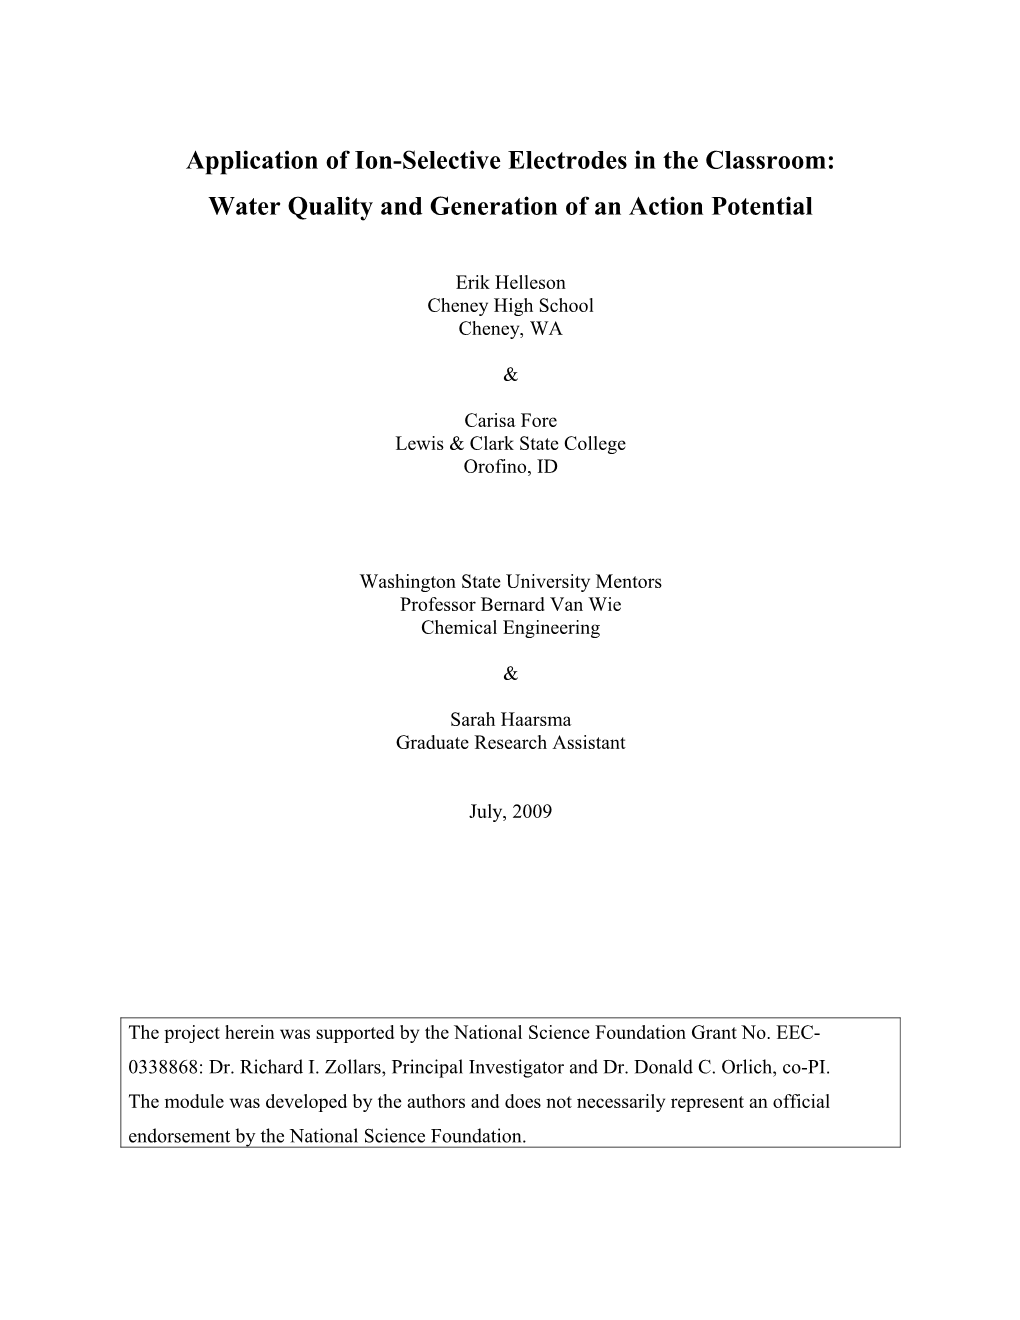 Application of Ion-Selective Electrodes in the Classroom: Water Quality and Generation